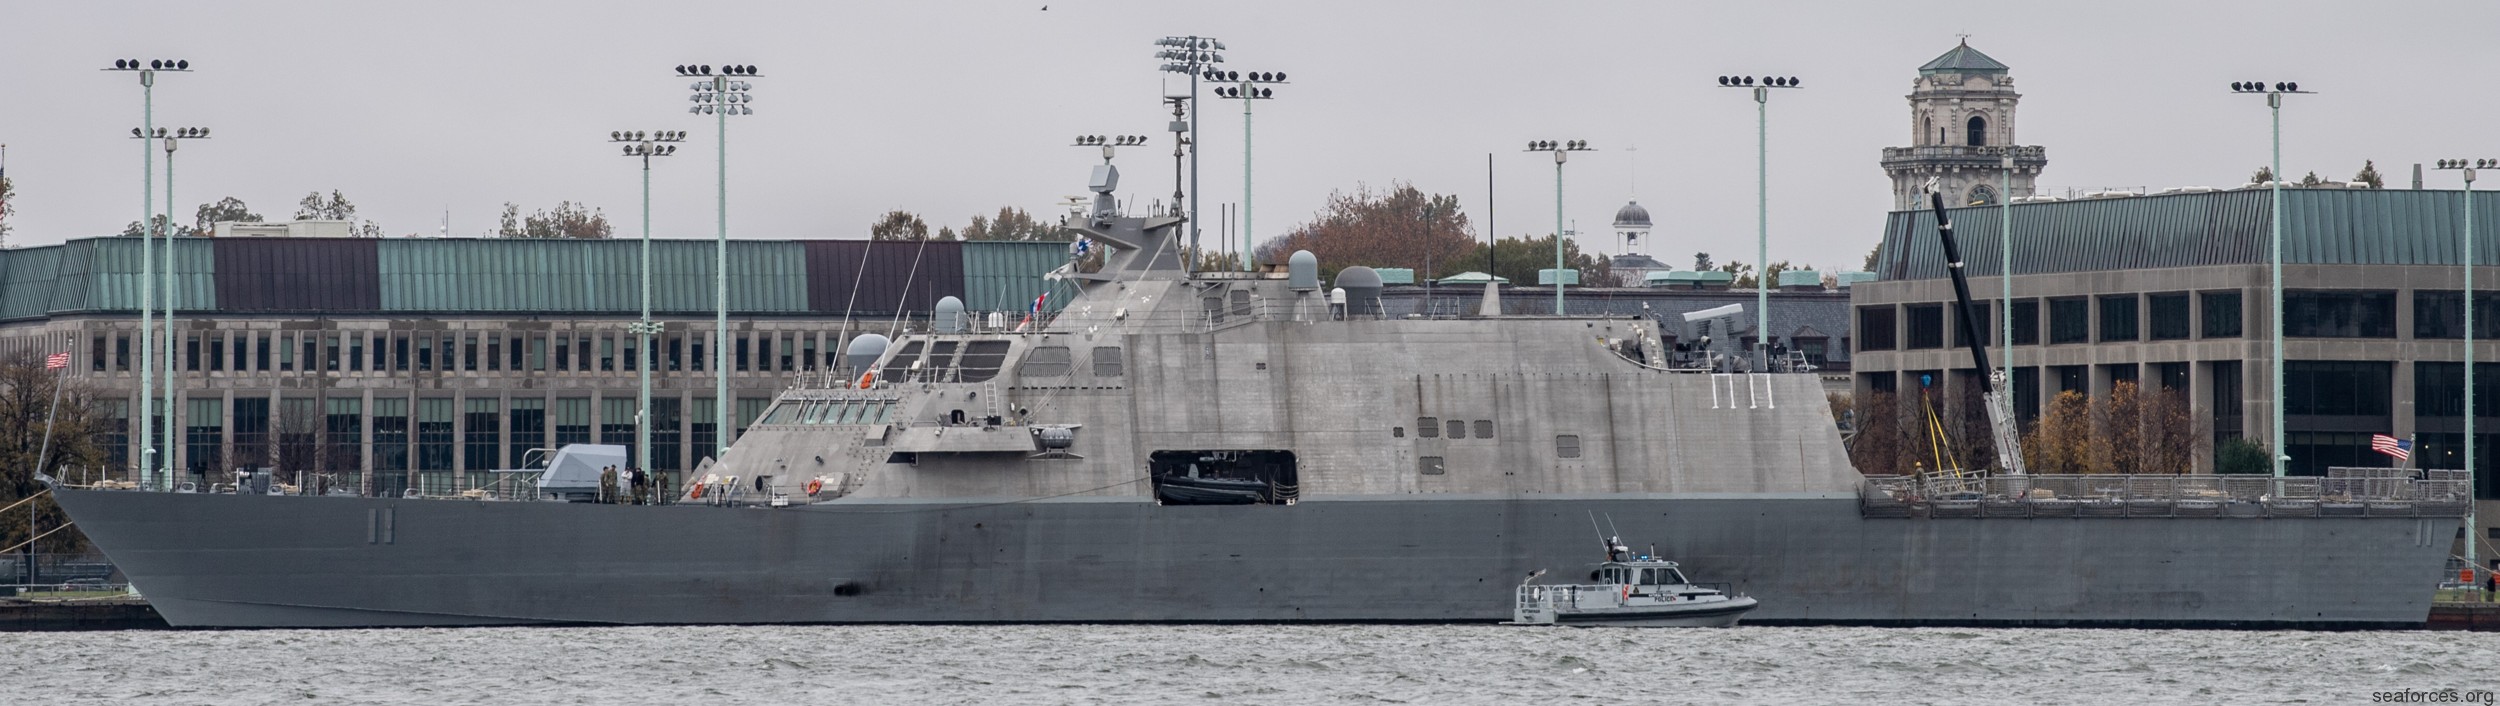 lcs-11 uss sioux city freedom class littoral combat ship us navy 07 annapolis maryland